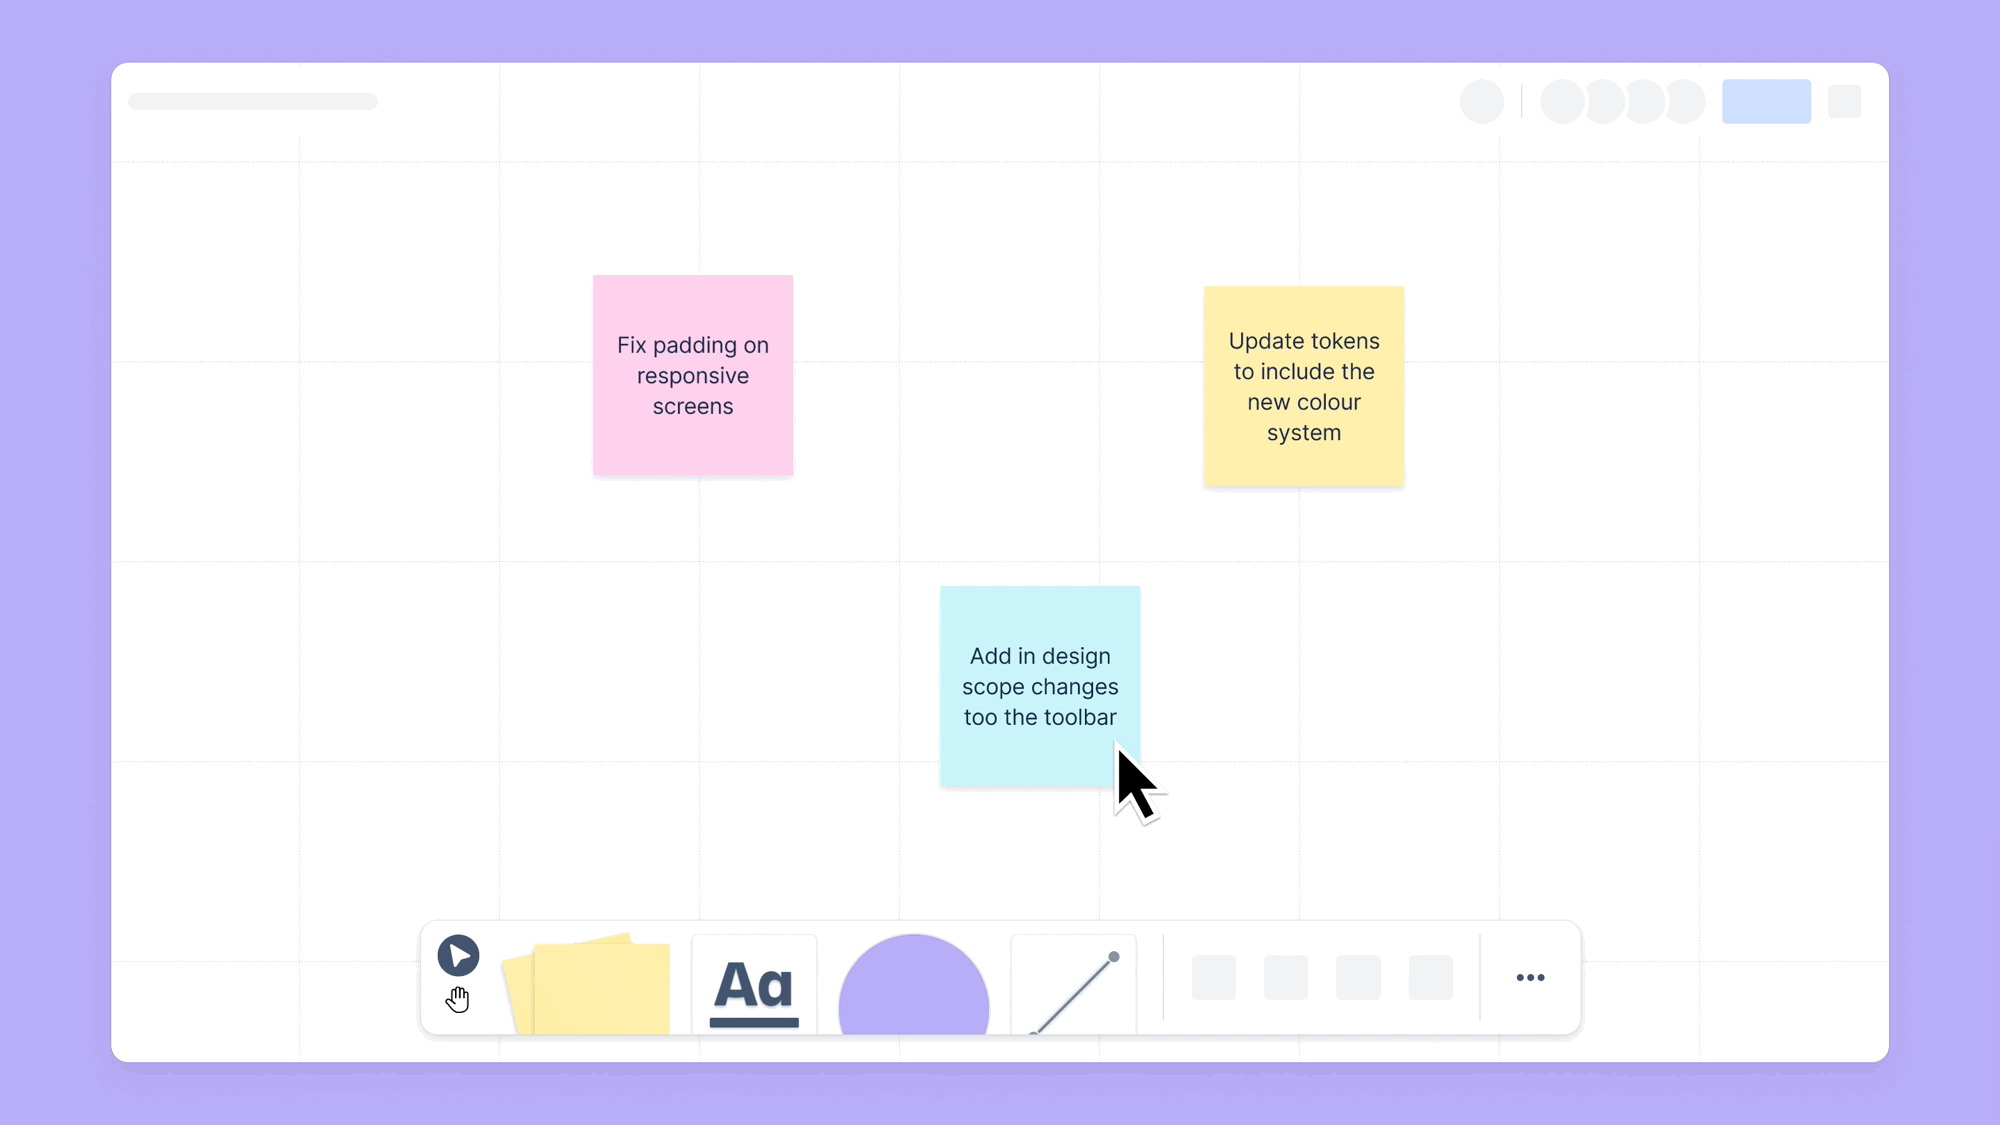 Copying sticky notes from a whiteboard into another app